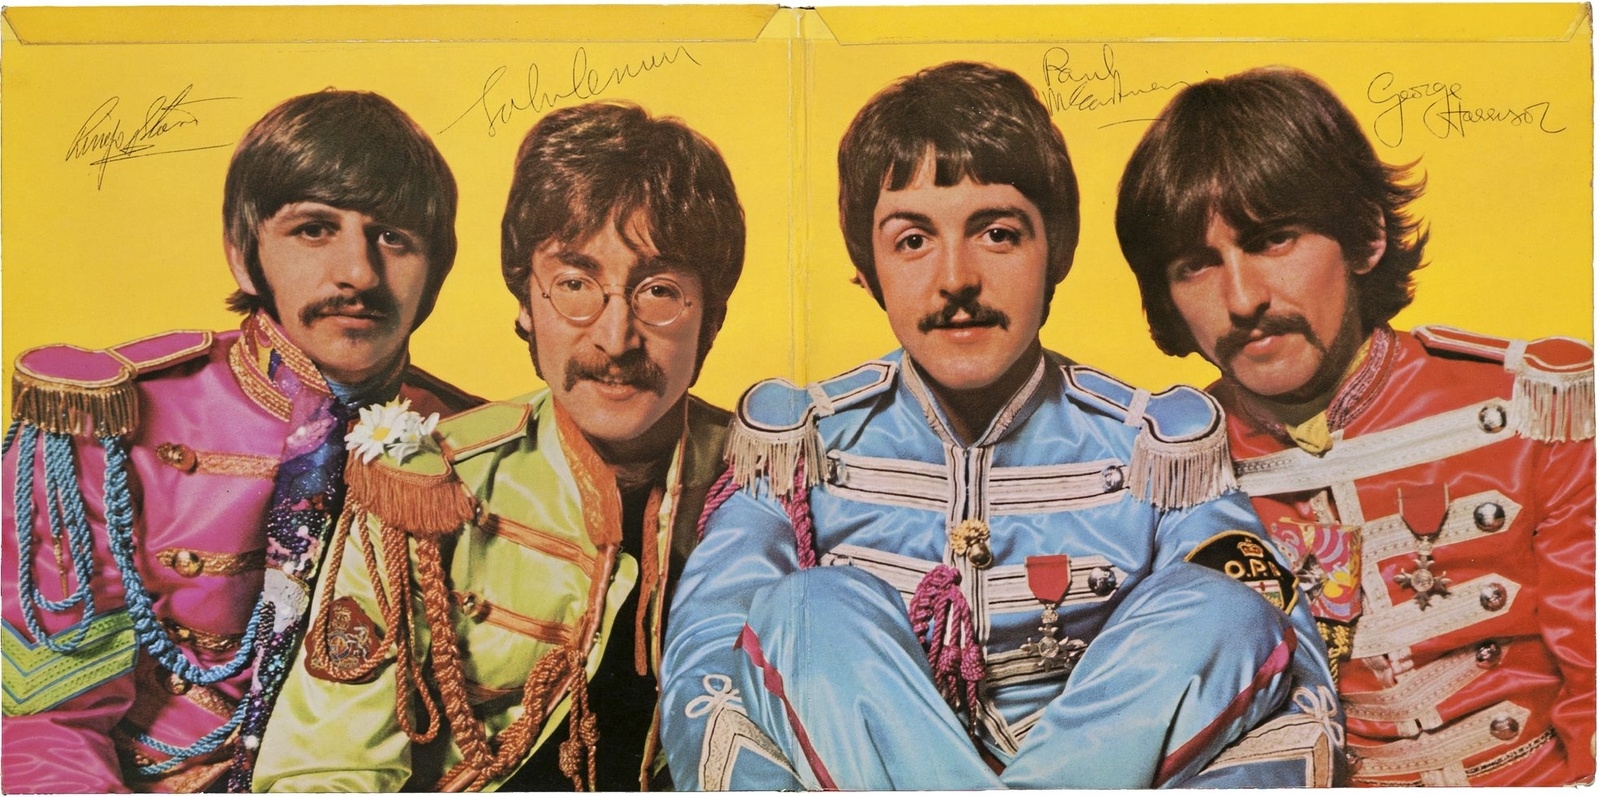 This undated image provided by Heritage Auctions shows what is described as a pristine copy of The Beatles Sgt. Peppers Lonely Hearts Club Band album autographed by all four members of the band, that is up for auction. A statement from Dallas-based Heritage Auctions says the bidding for the album has passed $110,000 and could surpass $150,000 by the time bidding is closed on March 30. (AP Photo/Heritage Auctions)